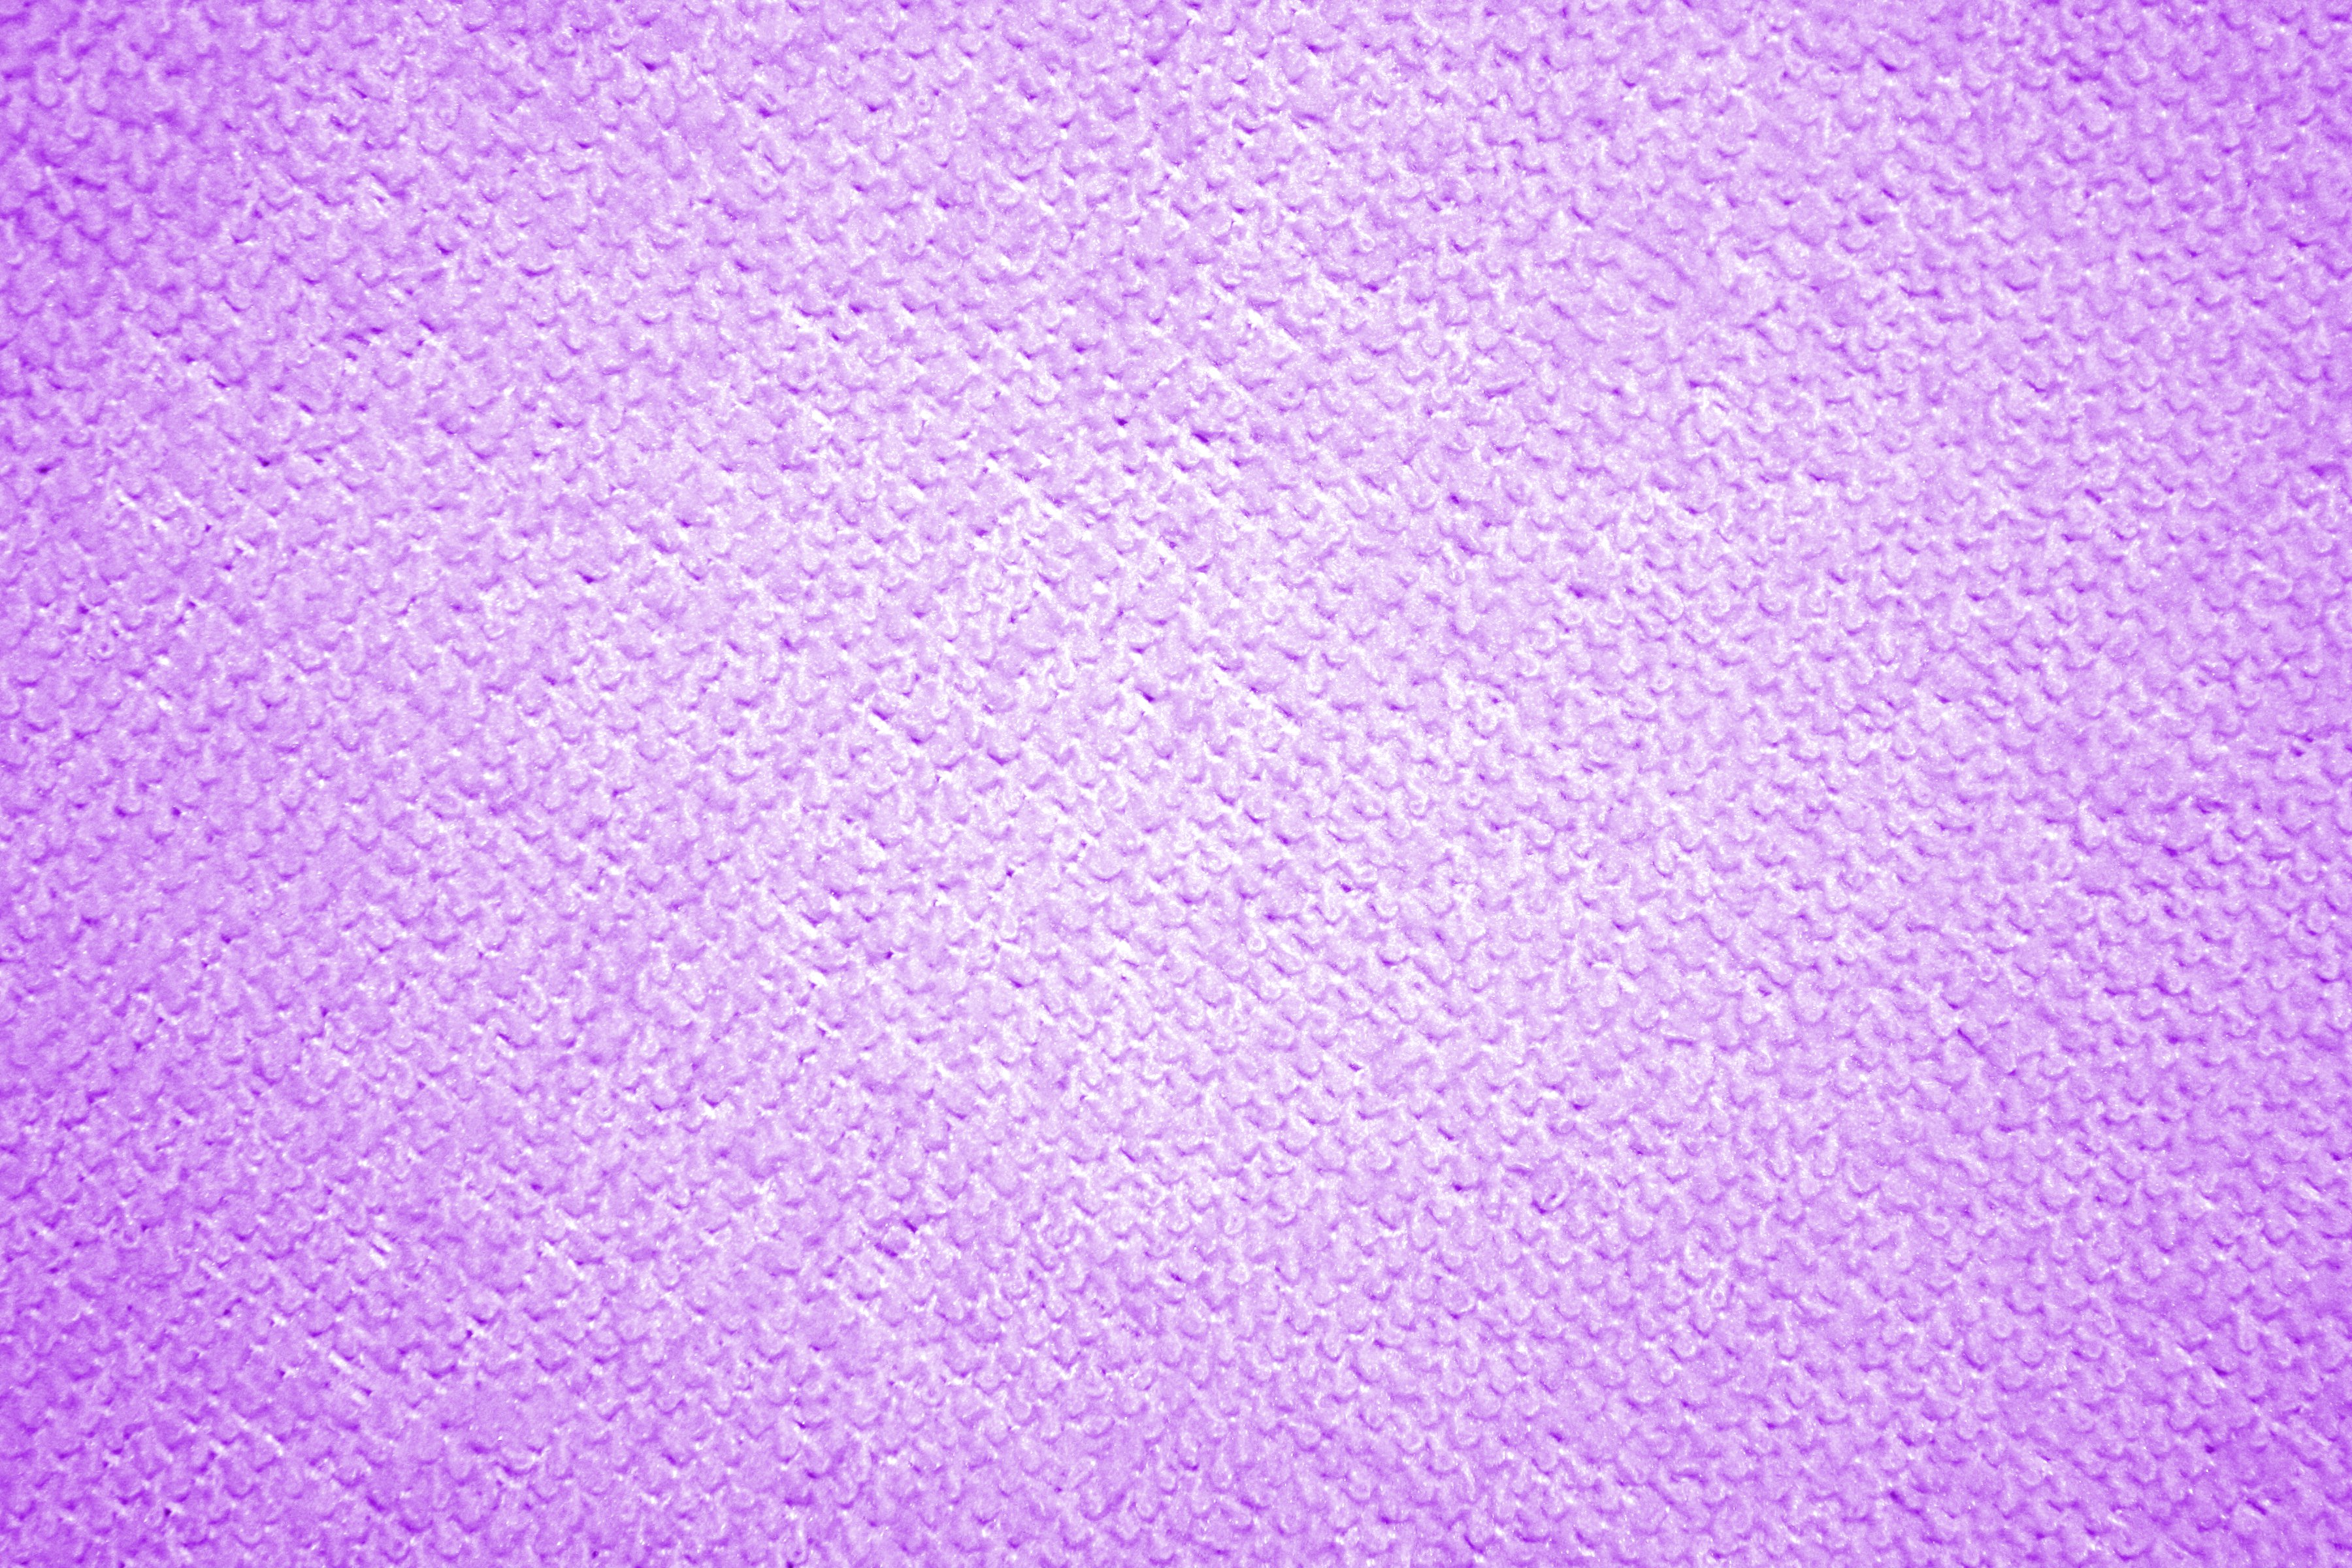 Lavender Fabric Texture Picture, Free Photograph